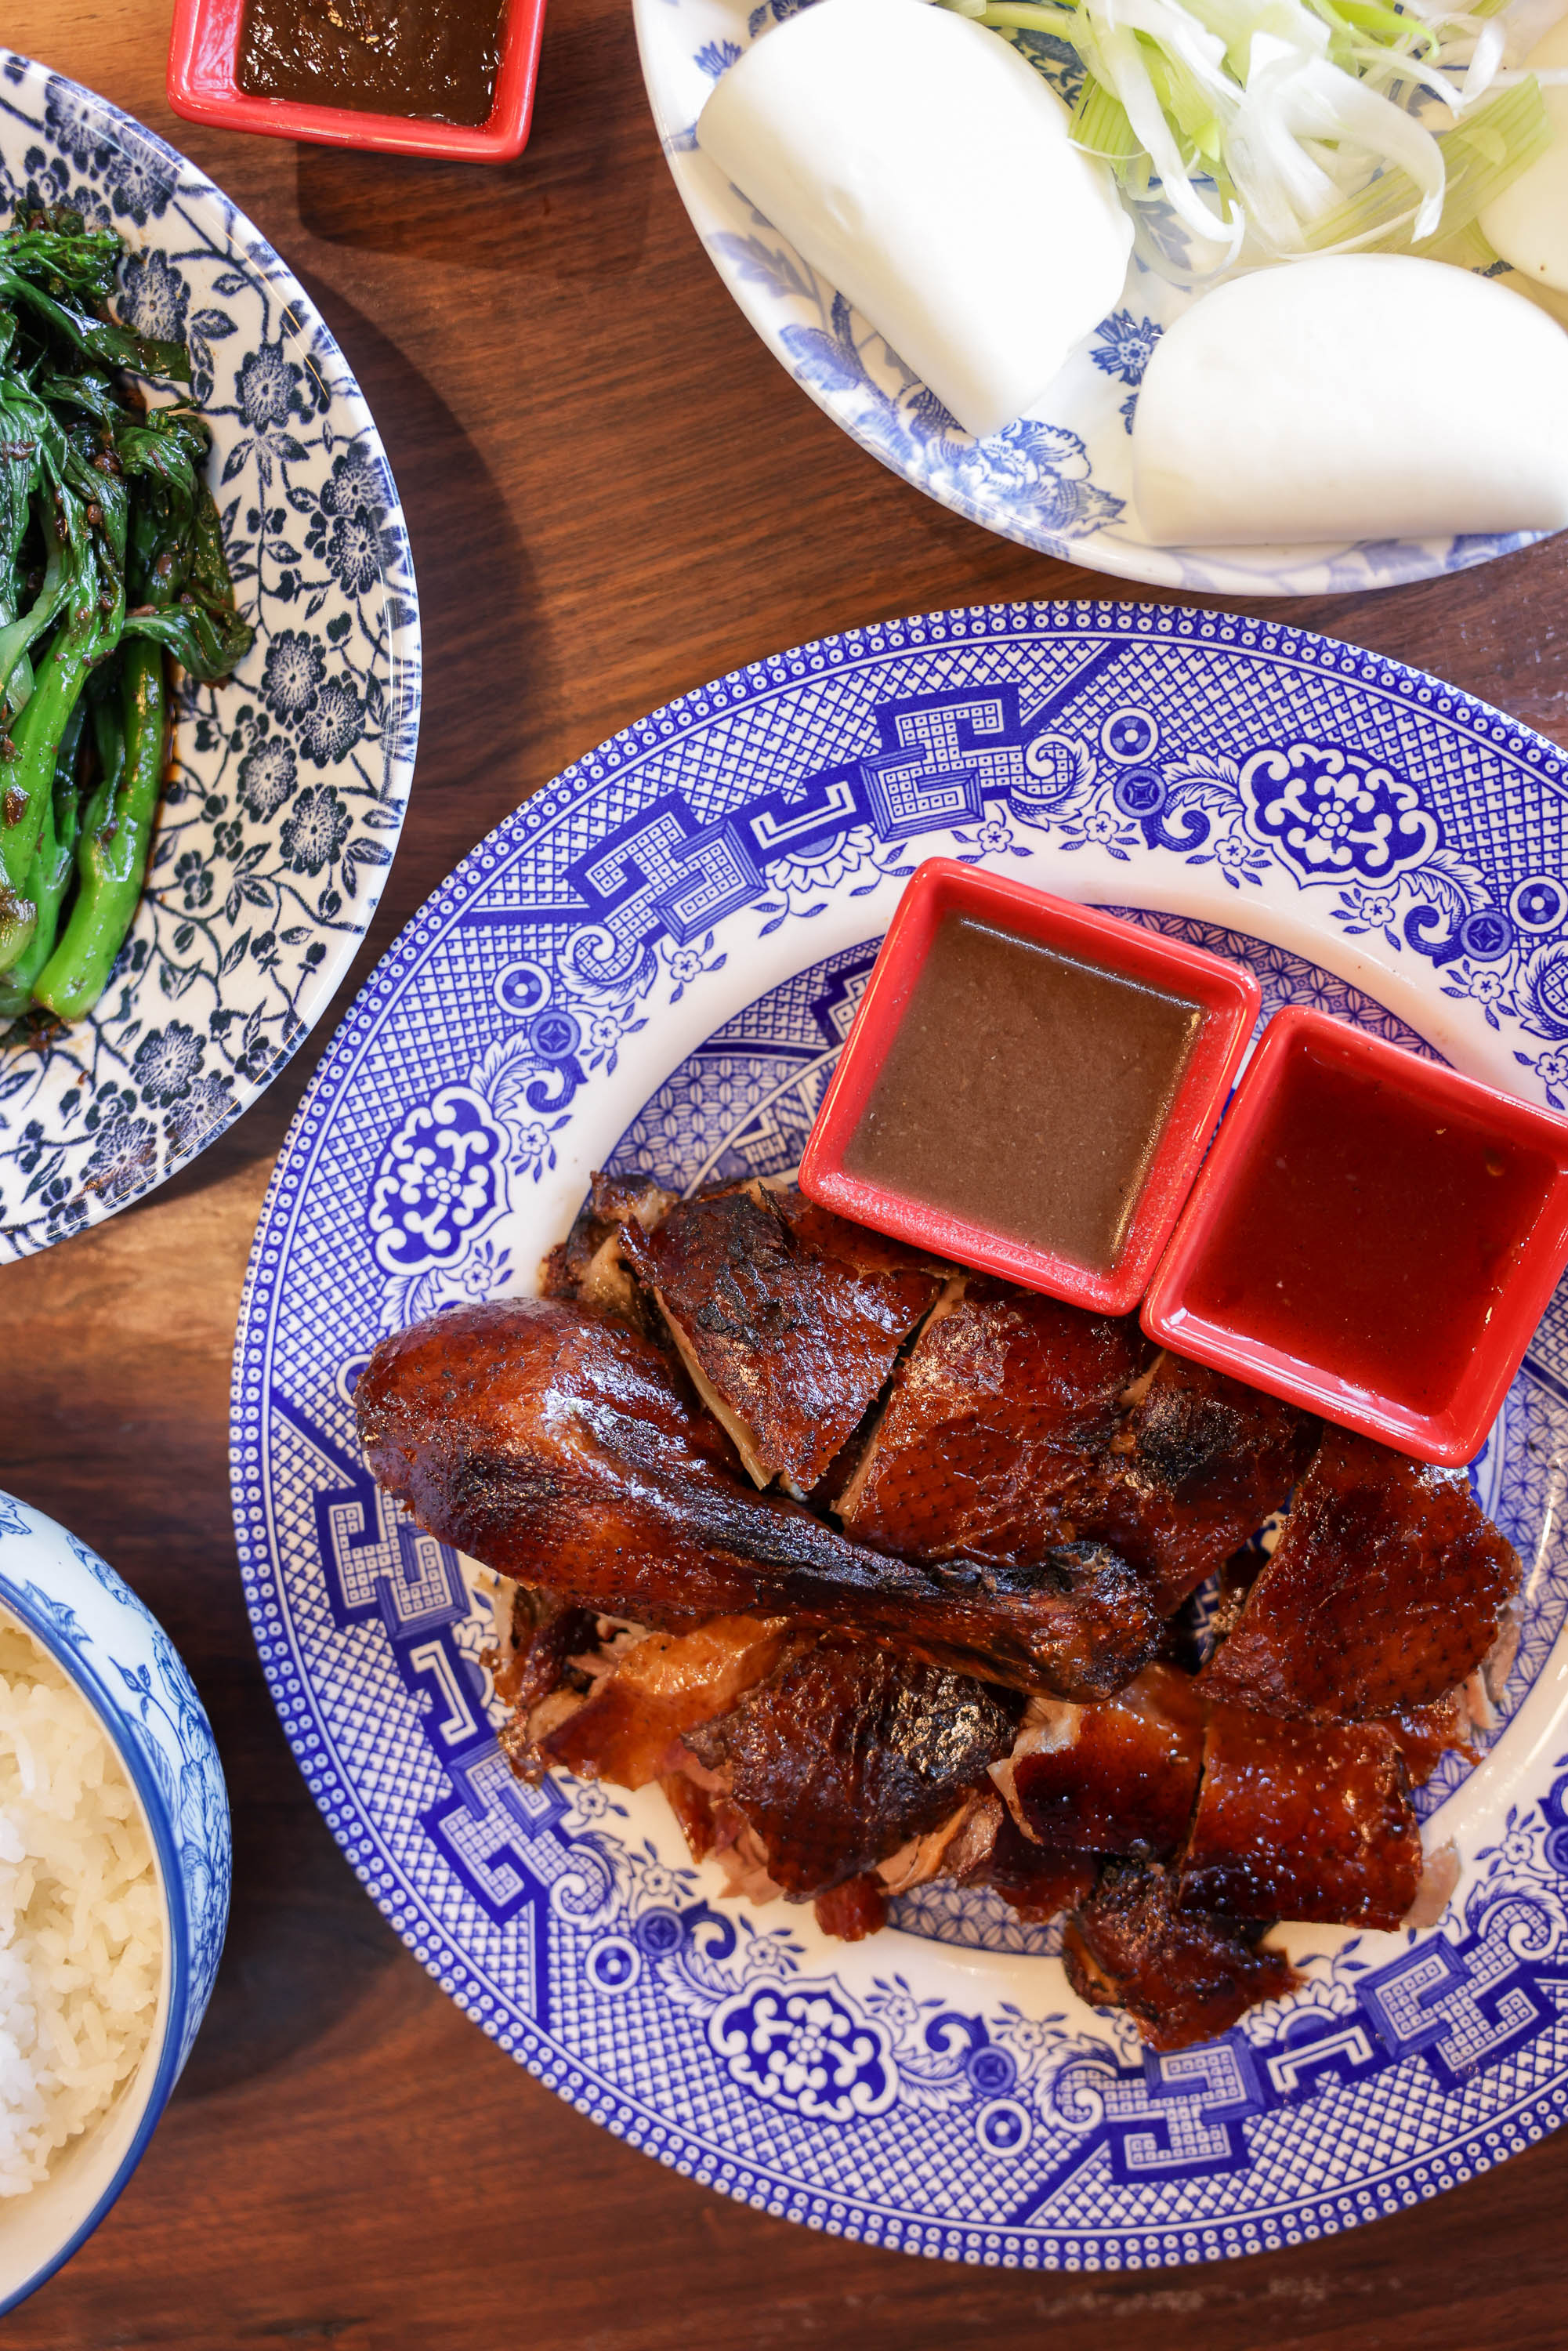 A table with Cantonese duck, steamed buns, green veggies, and sauces on ornate Chinese plates.